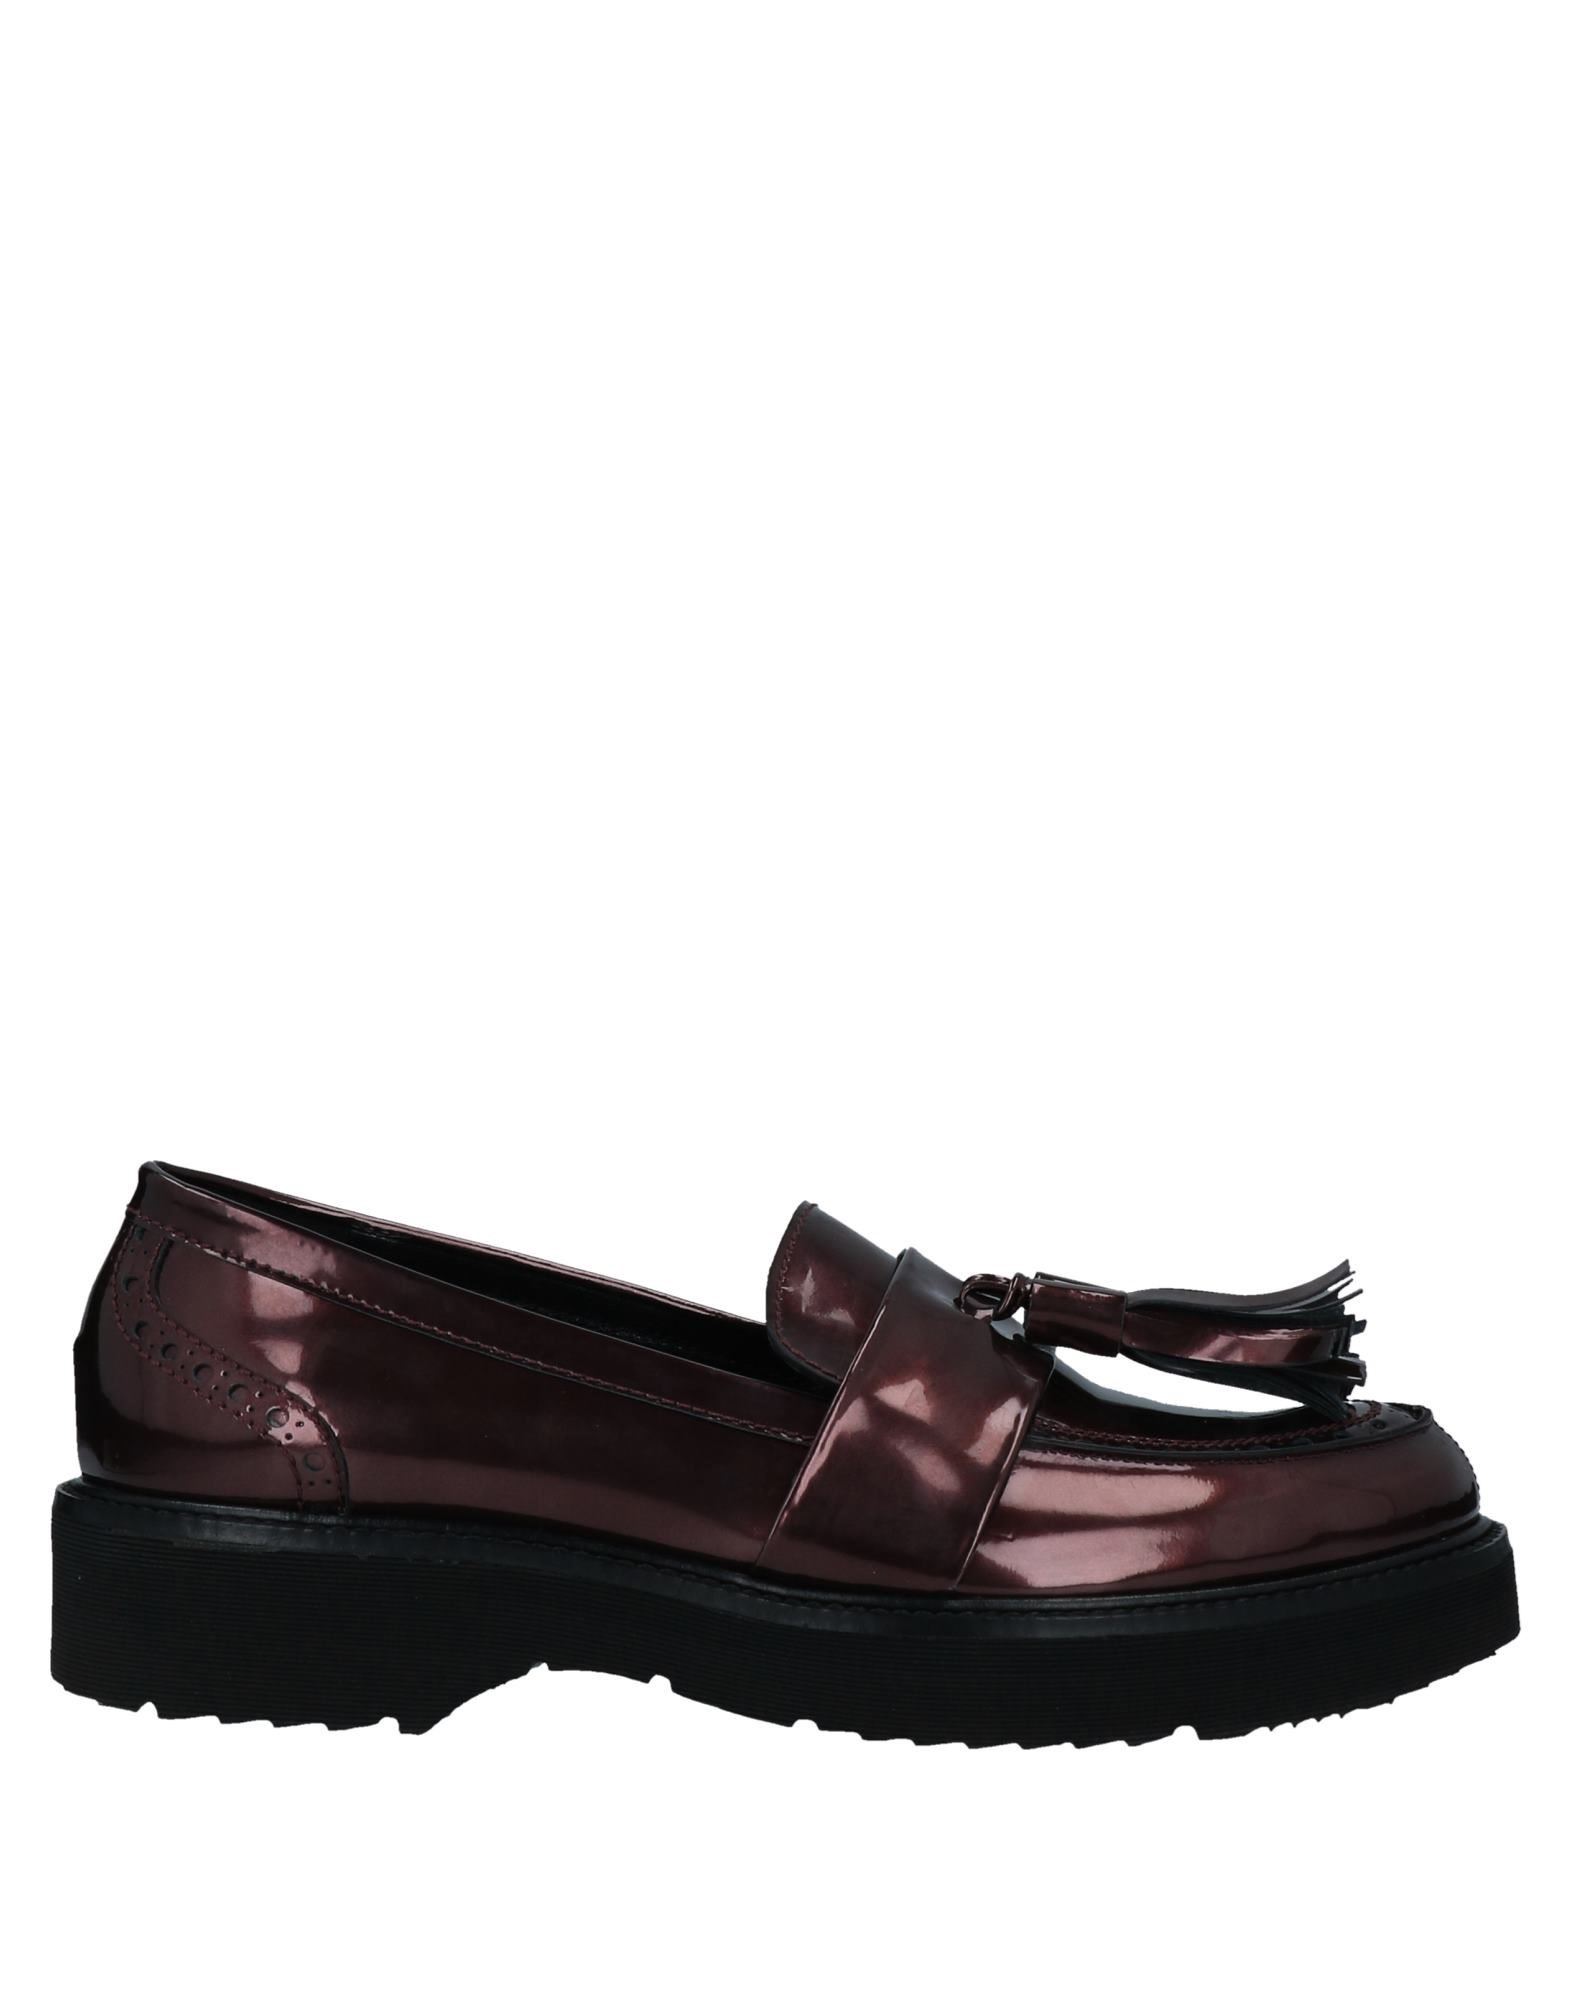 FRANCA Loafers